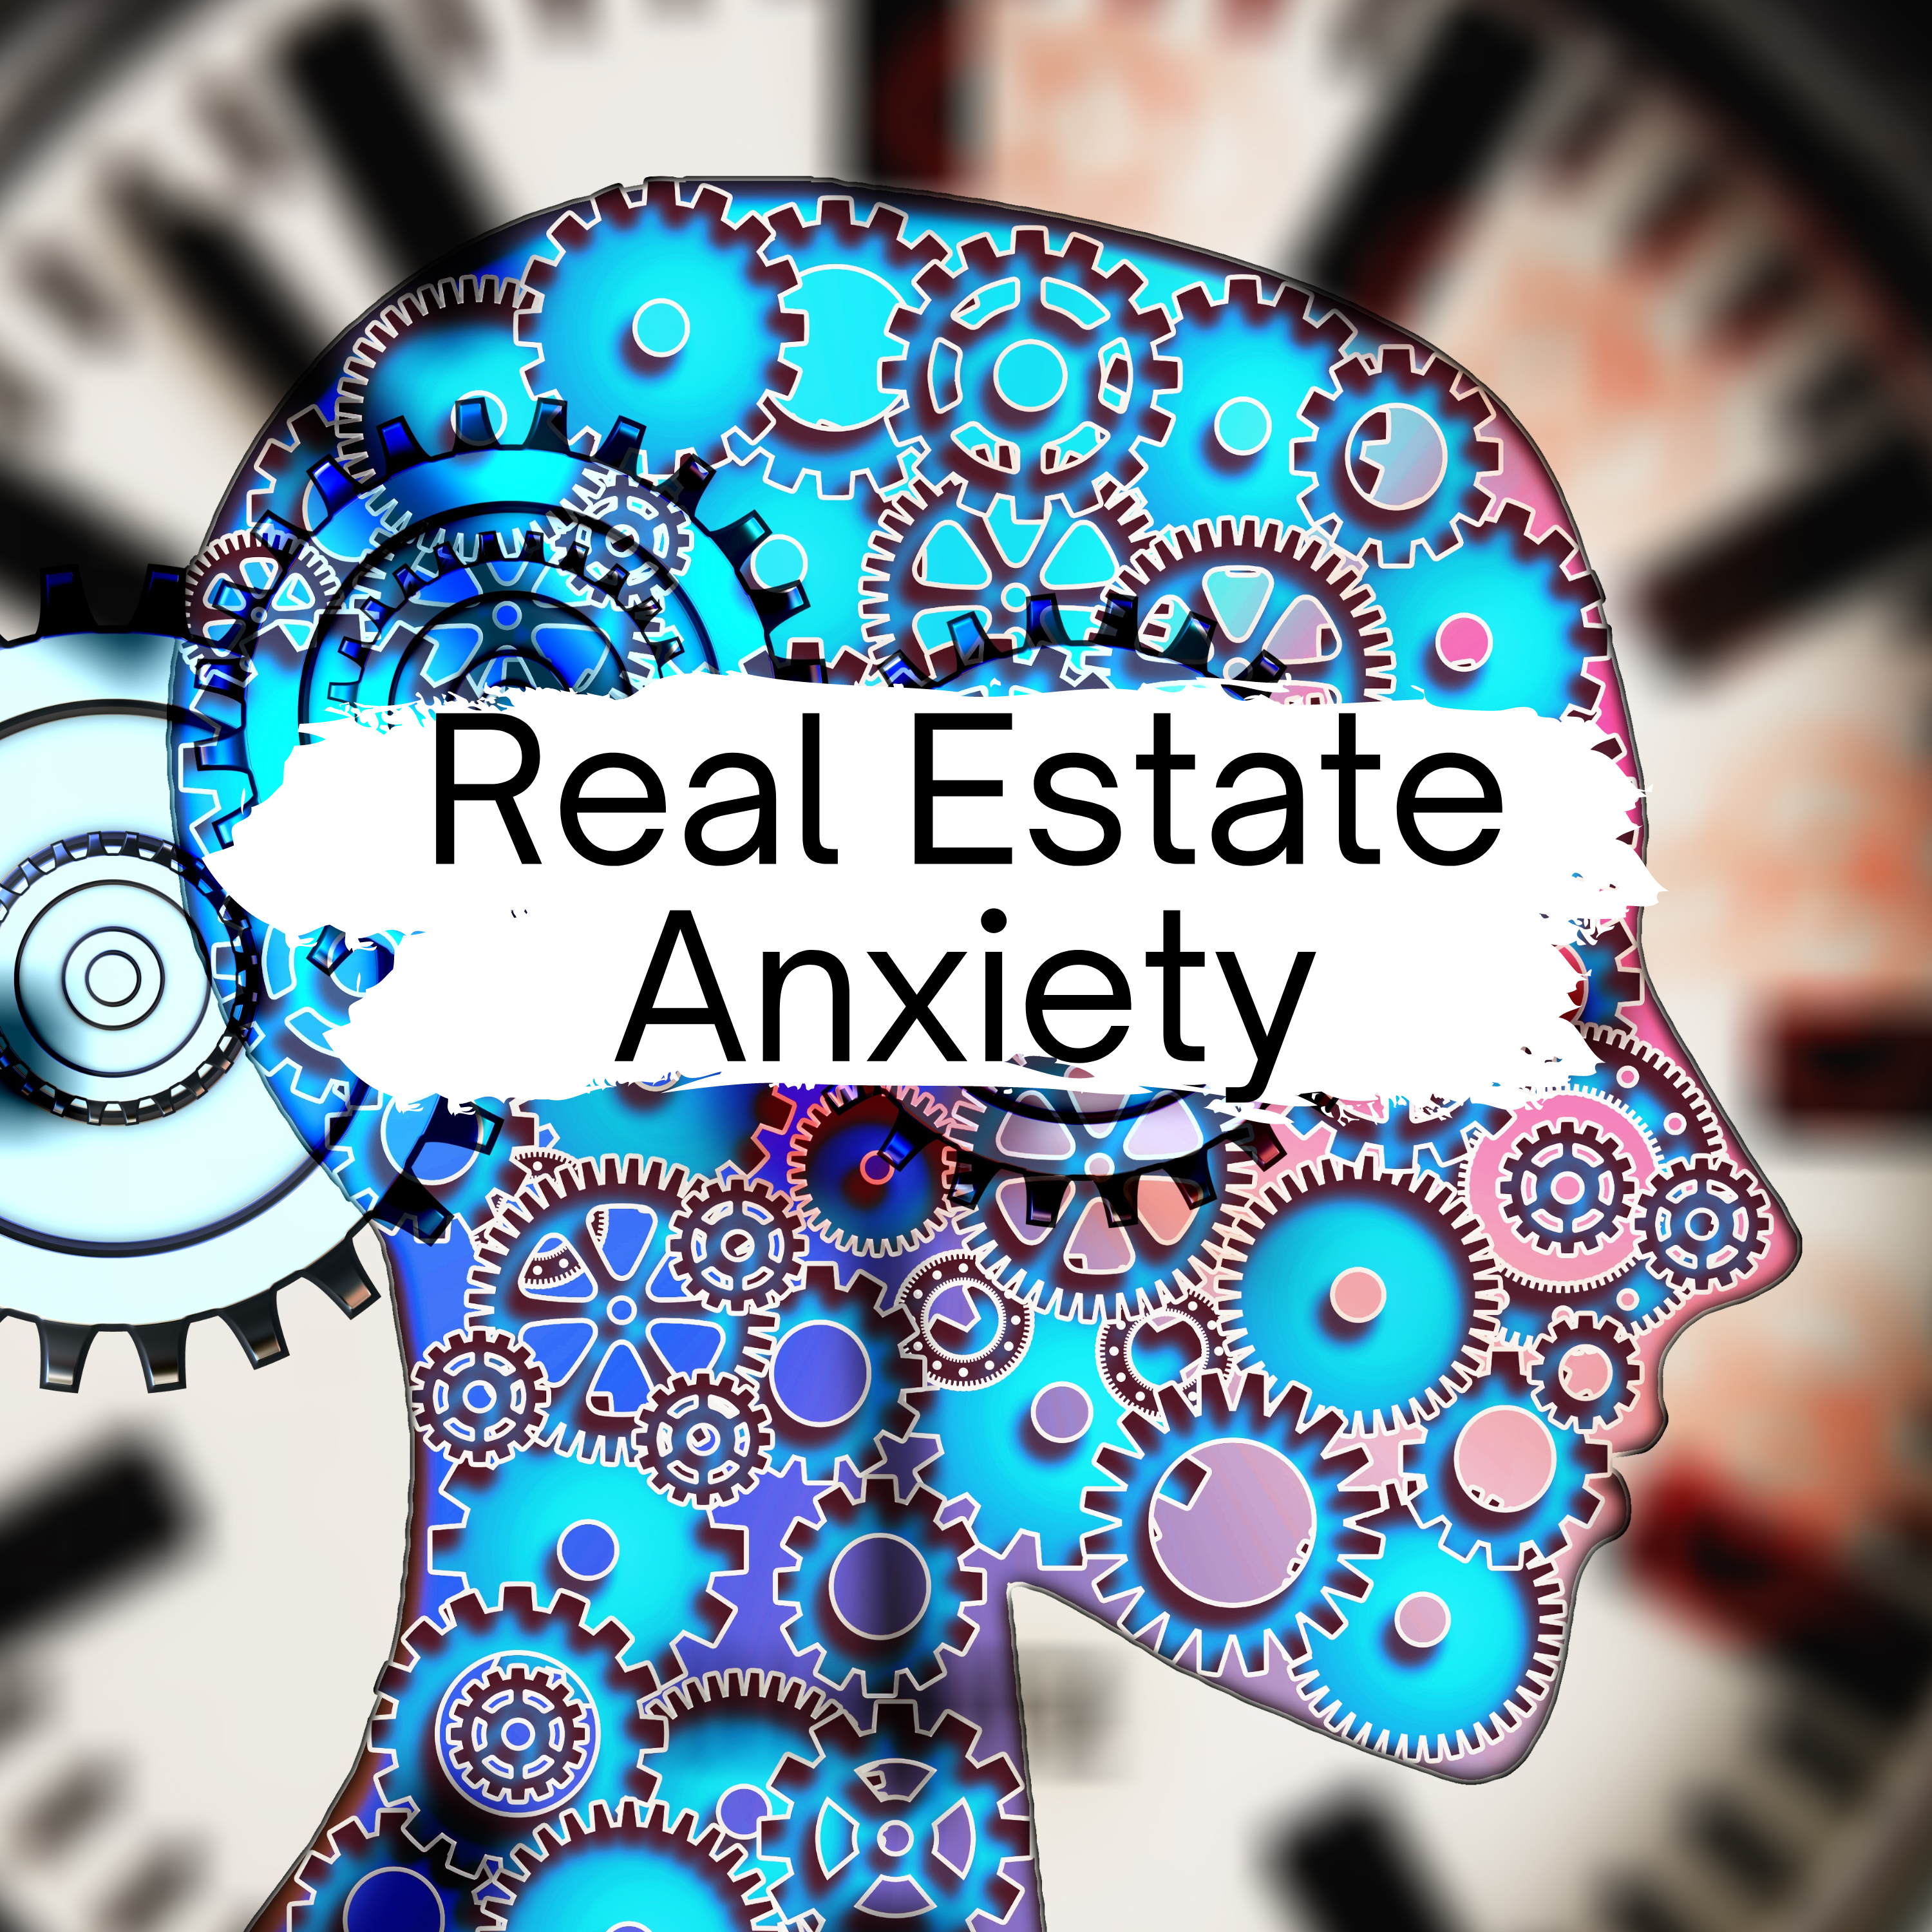 Real Estate Anxiety